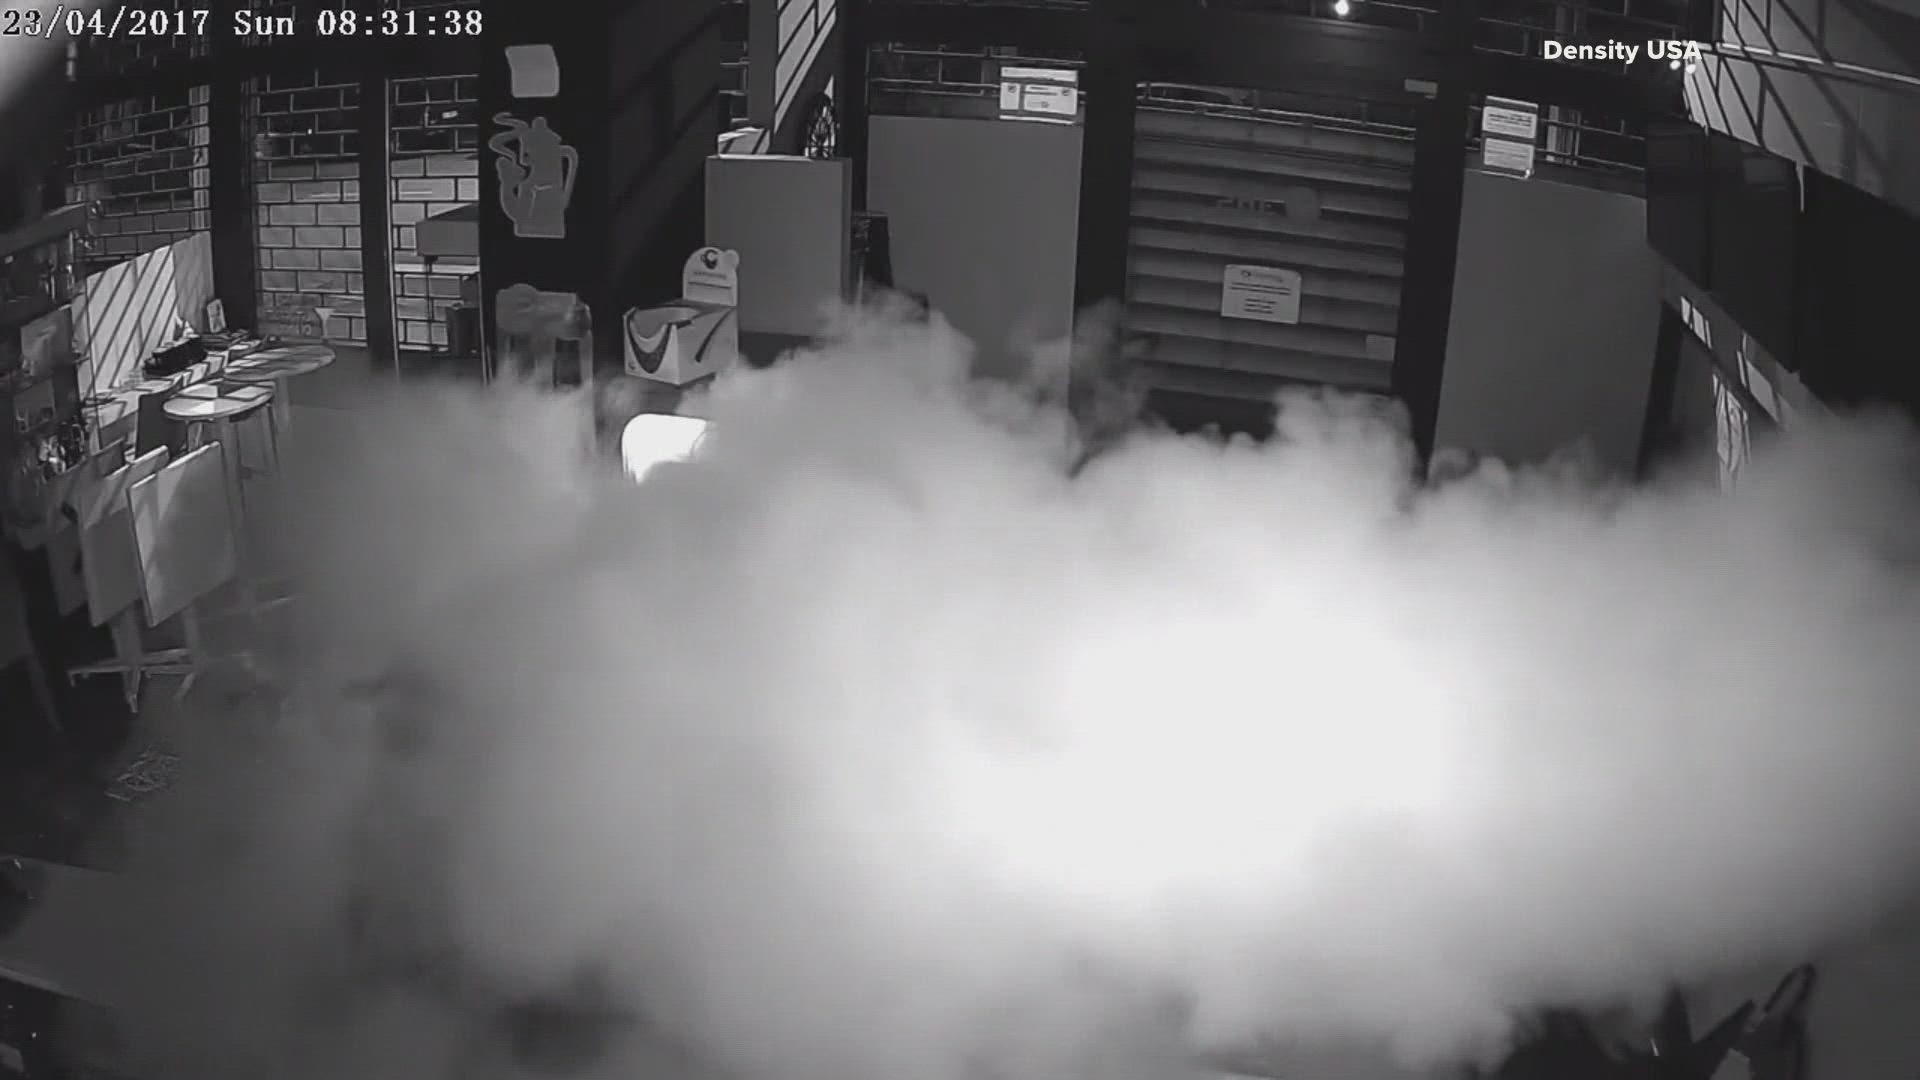 Several St. Louis companies will install fog machines as a way to prevent smash-and-grabs. Bader said prices start around $7,000.